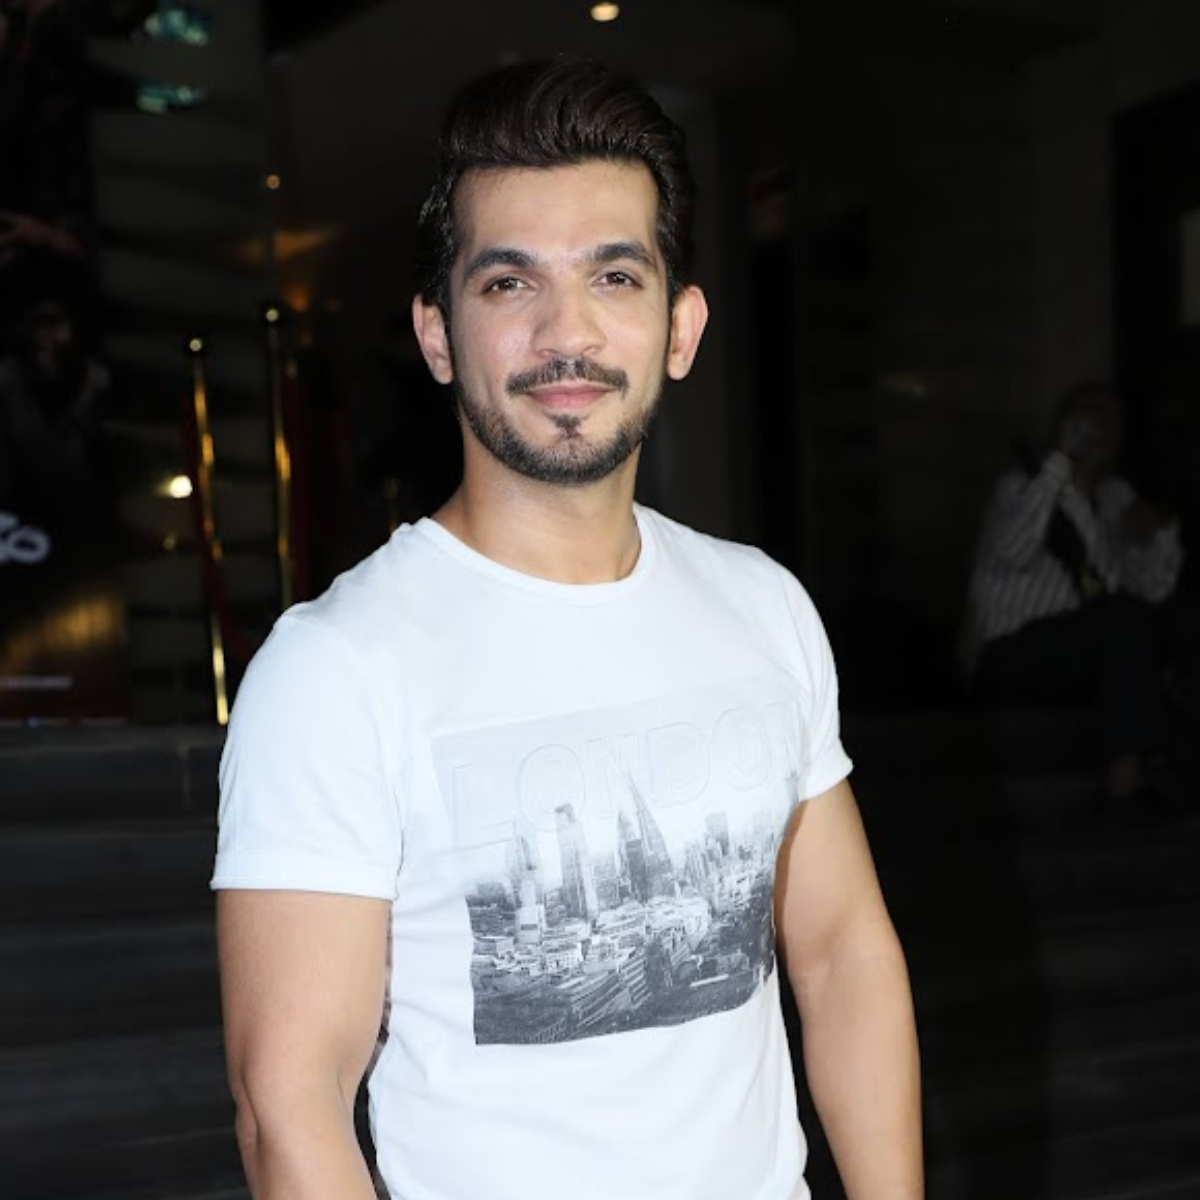 Naagin 6 EXCLUSIVE: Is Arjun Bijlani a part of the show? Here’s what the actor has to say